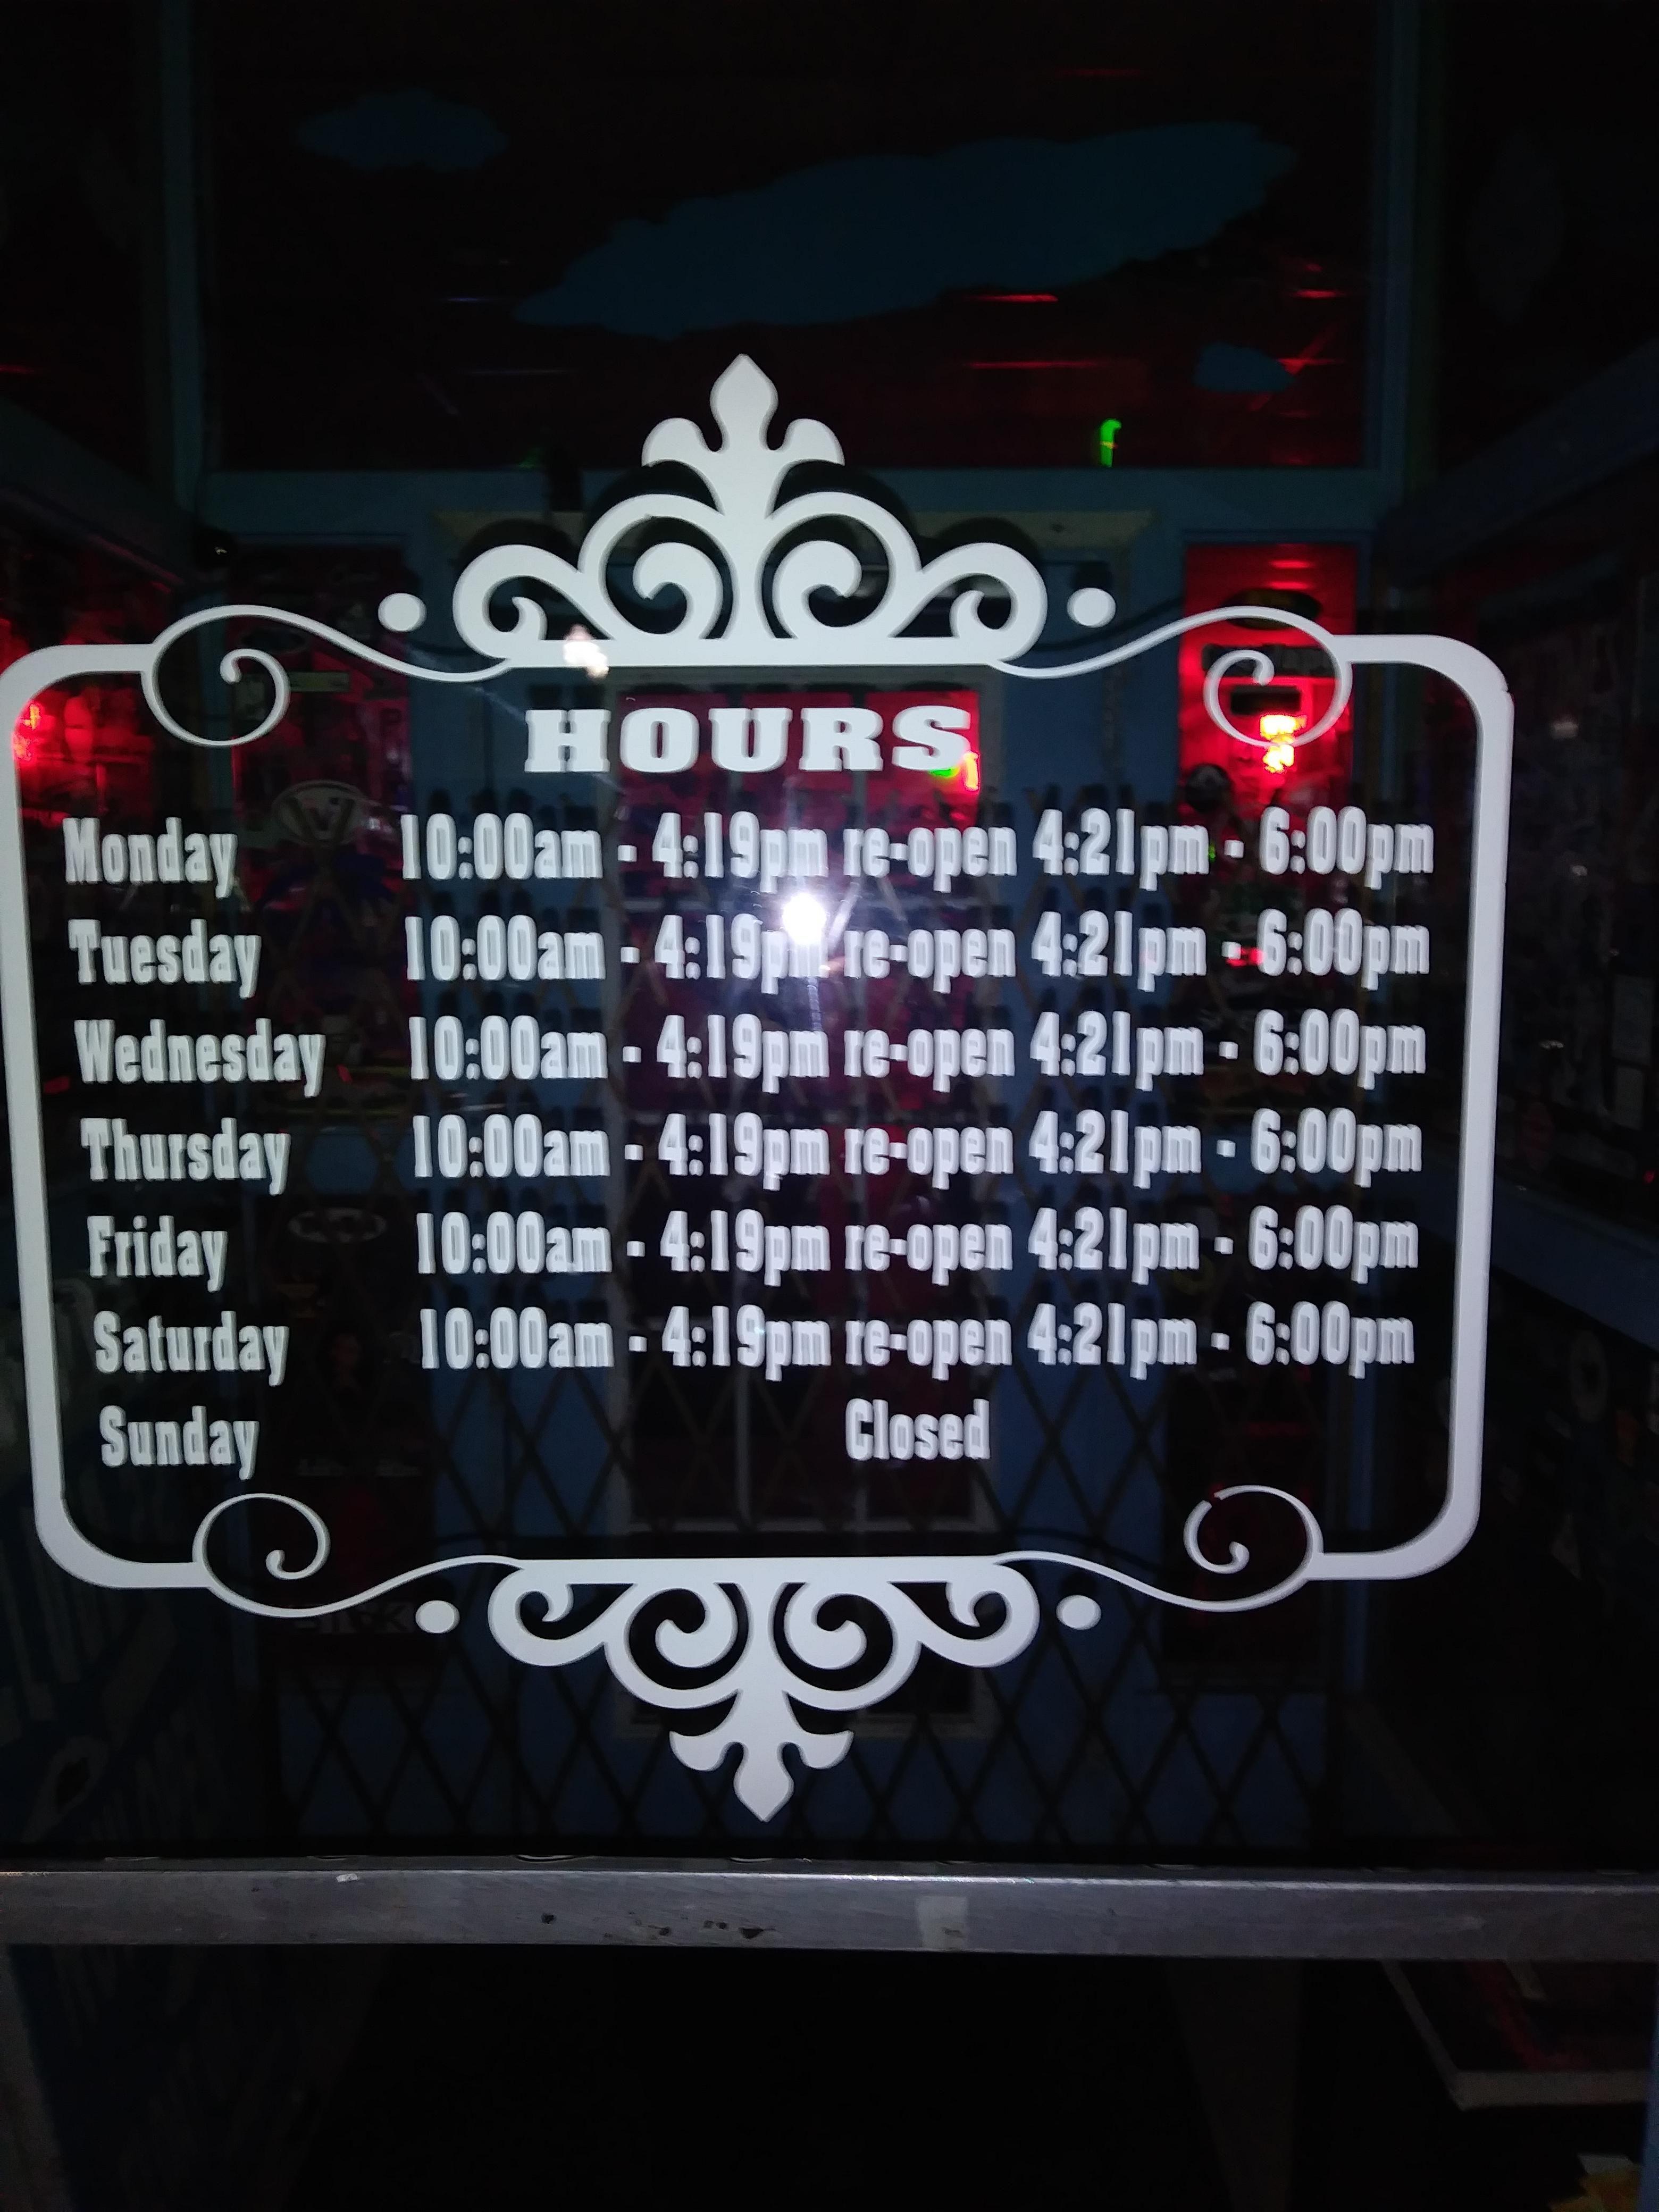 The hours to this smoke shop